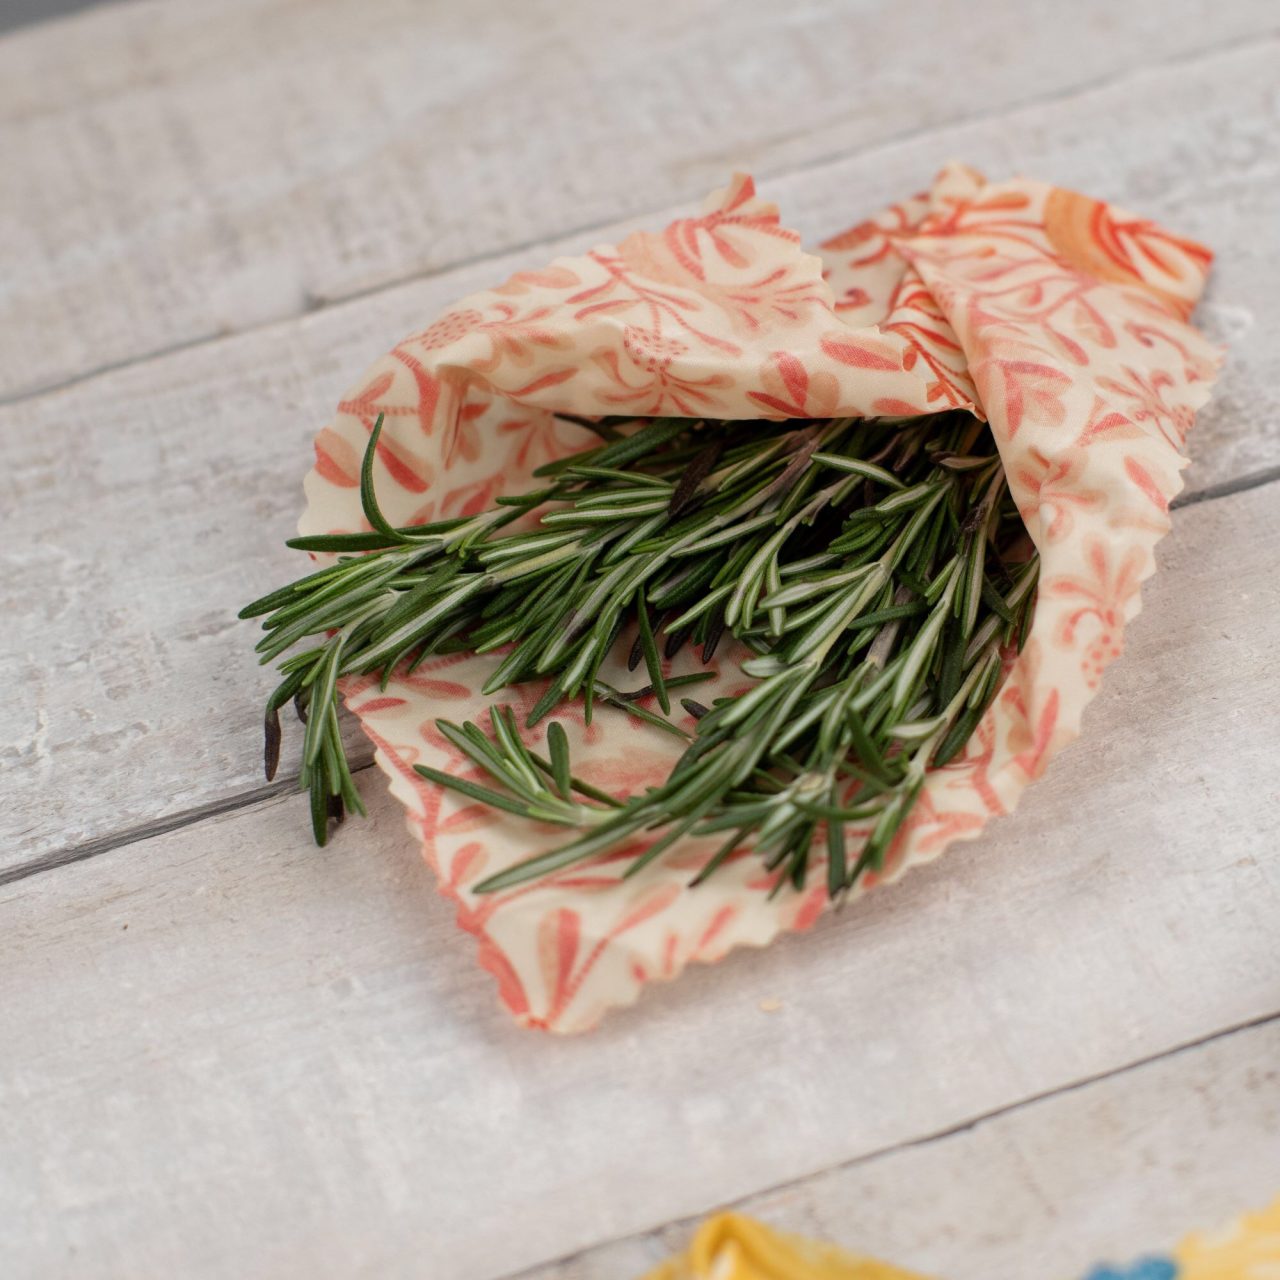 rosemary wrapped in beeswax wrap